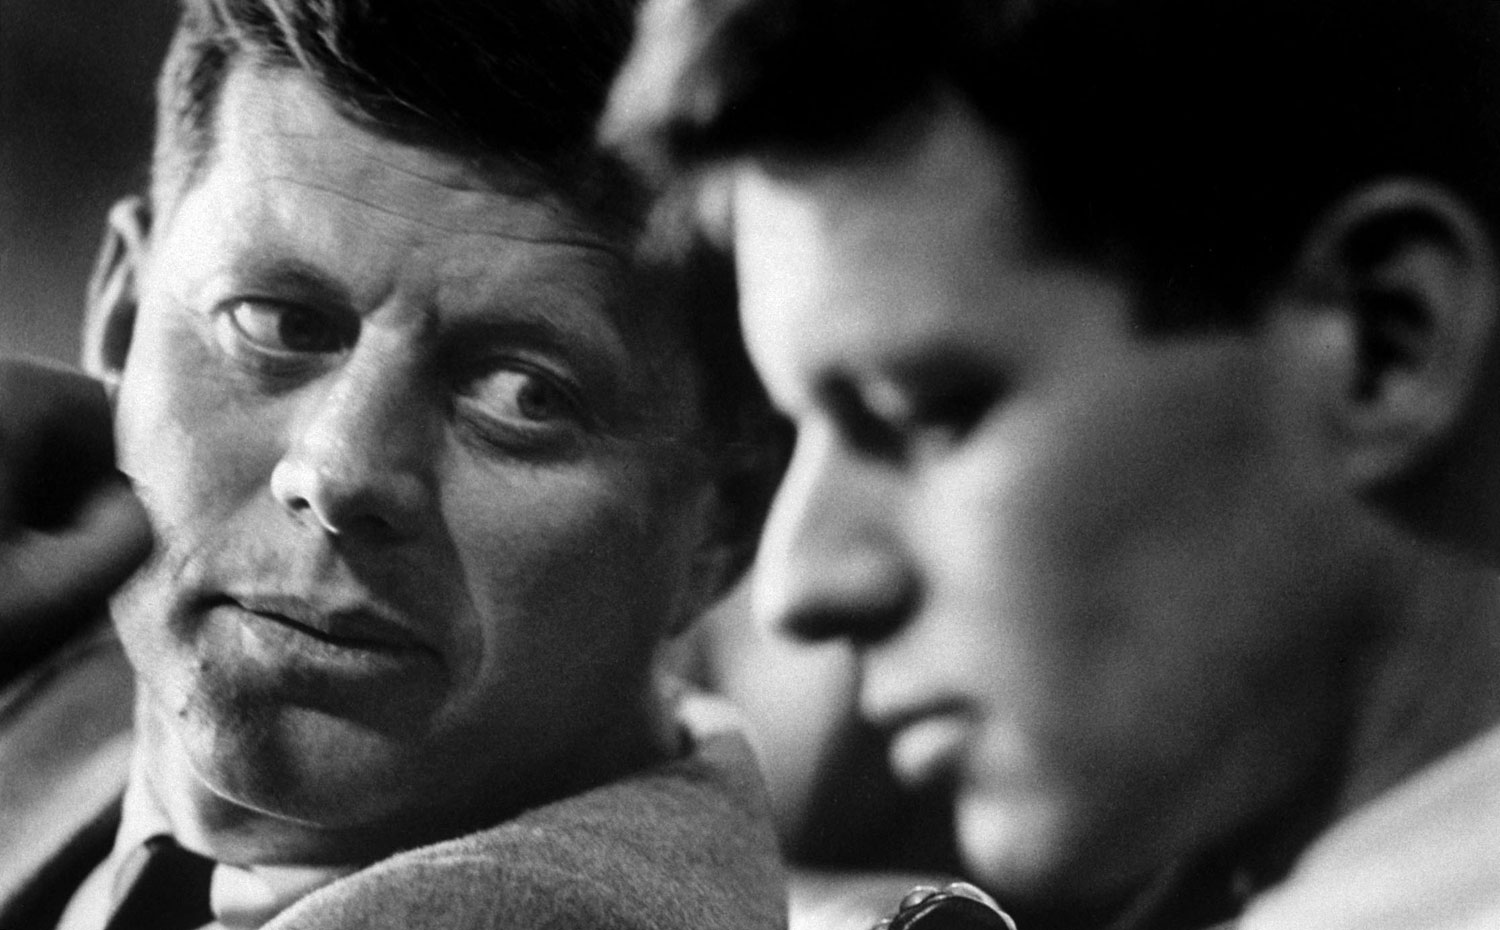 John and Robert Kennedy at a hearing of a Senate select committee on labor racketeering, 1957.